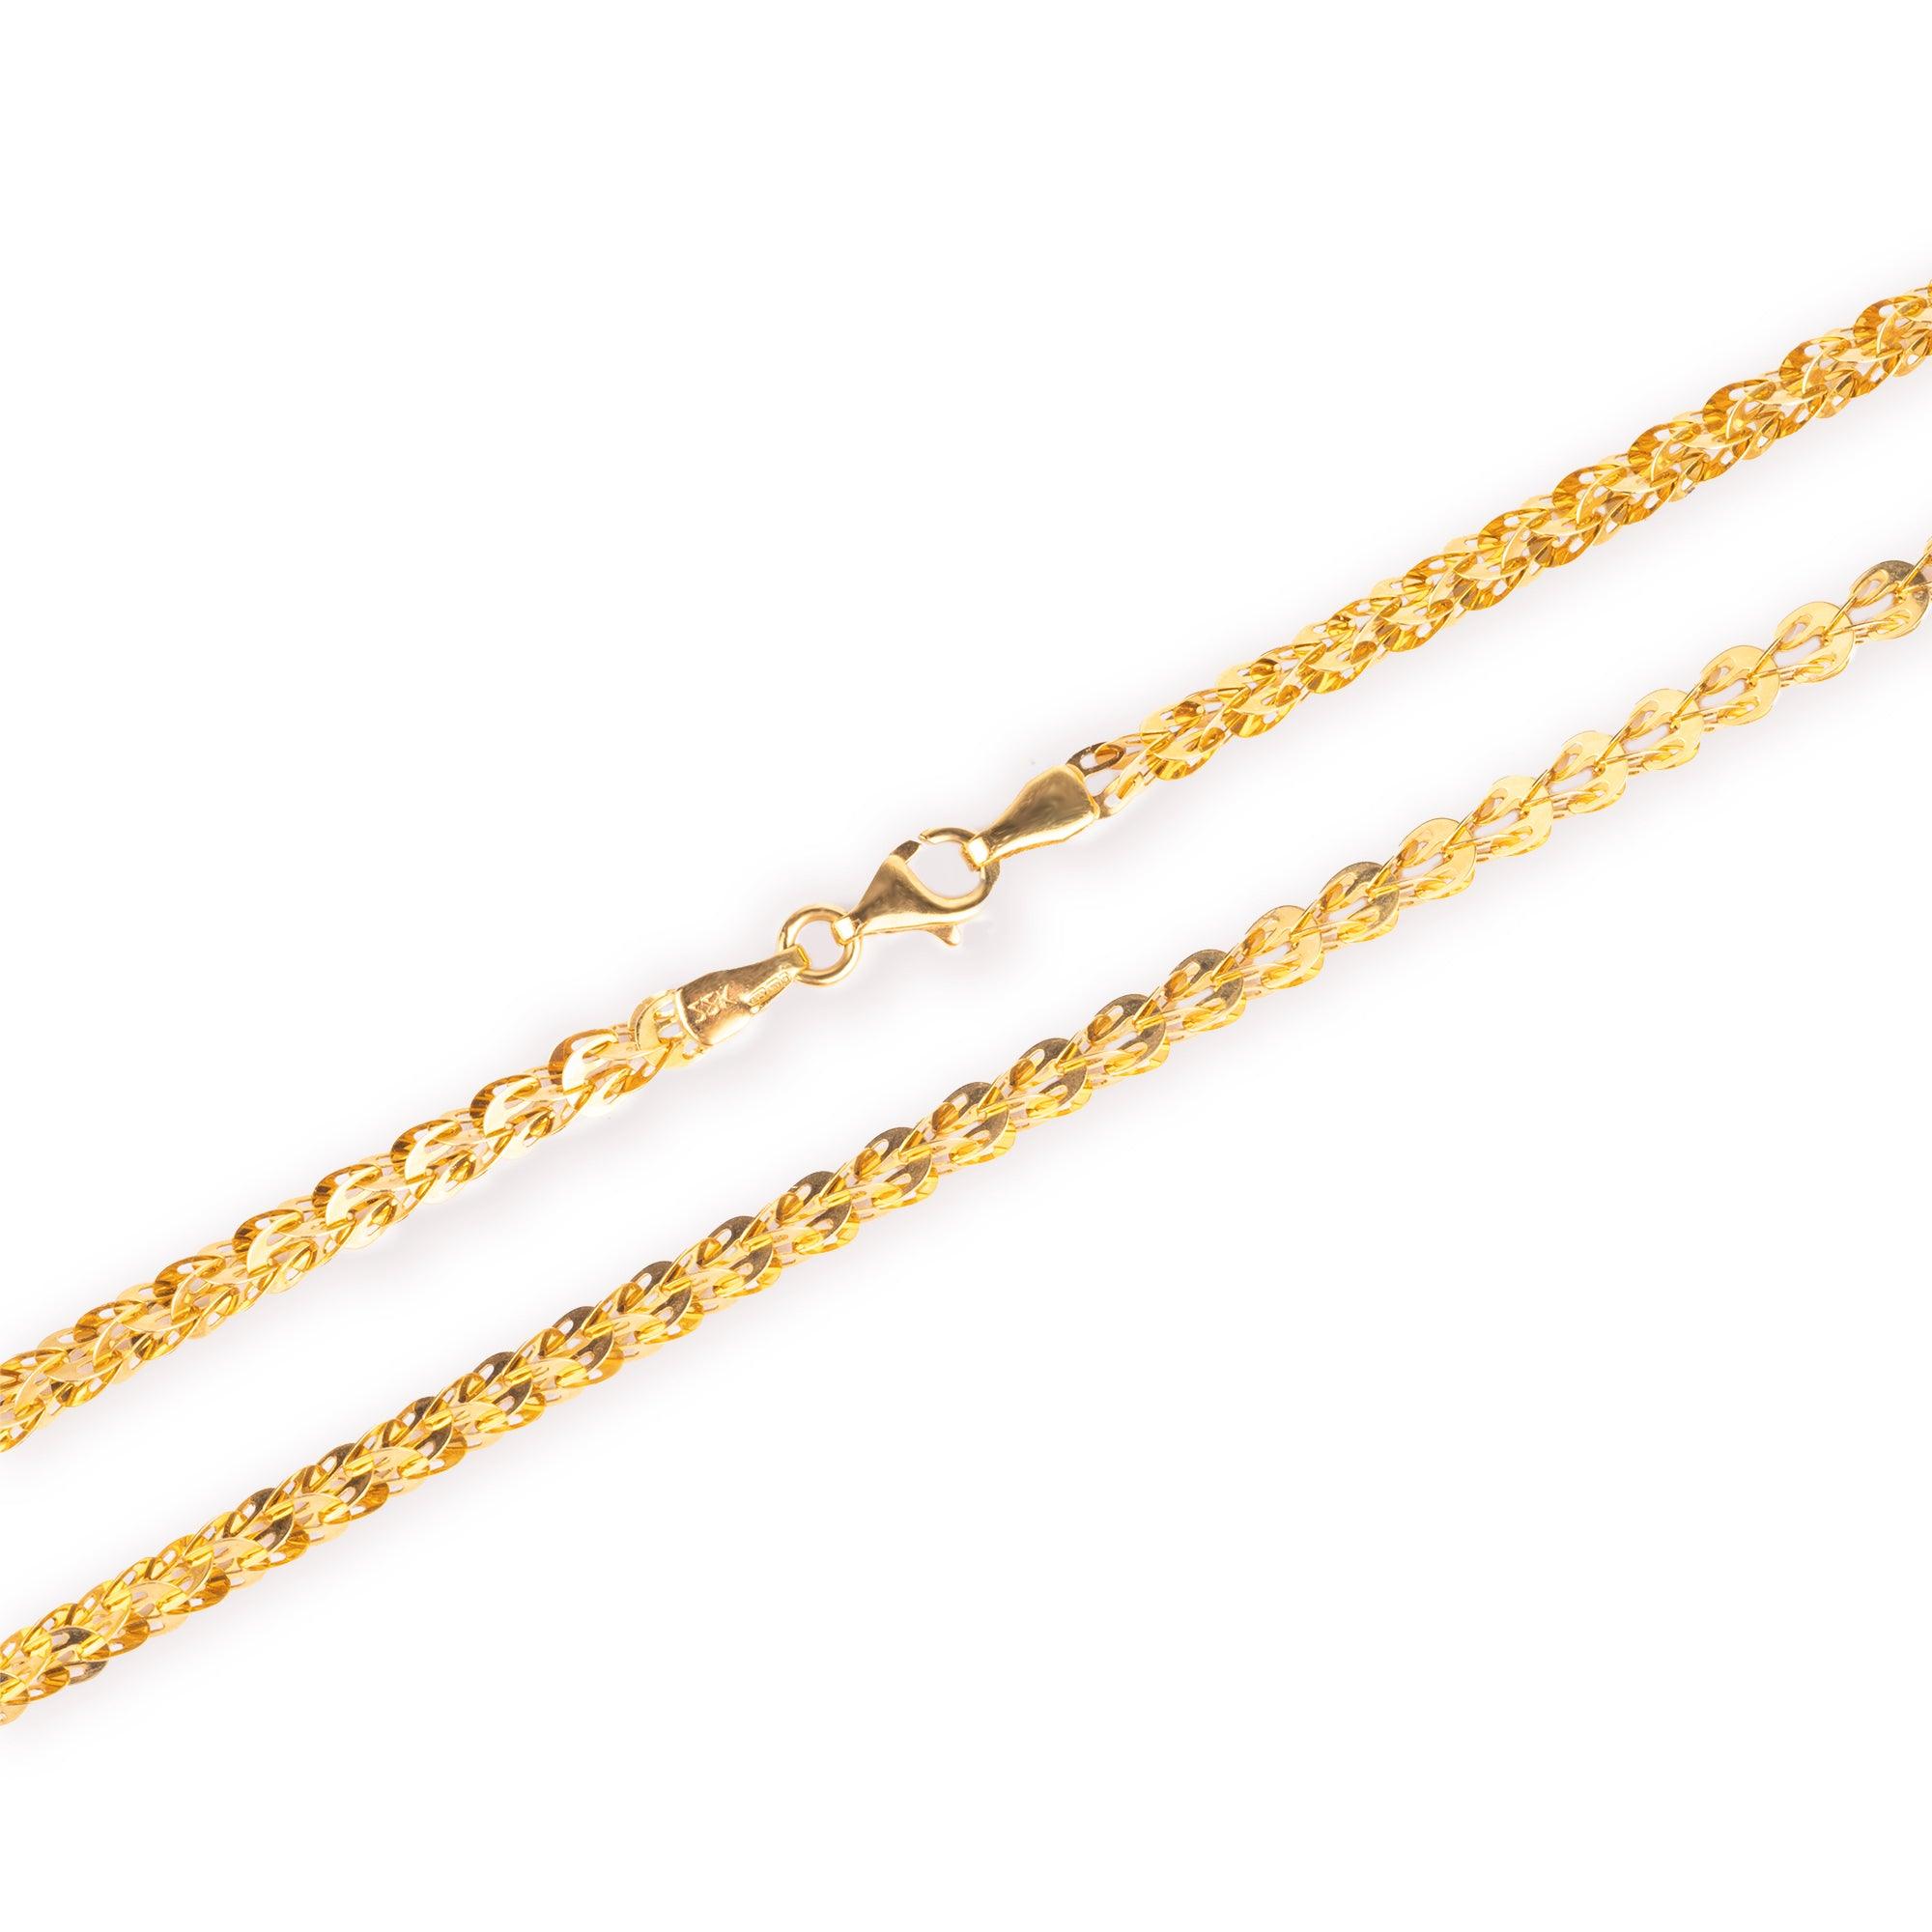 22ct Gold Fancy Chain with a hook clasp C-8451